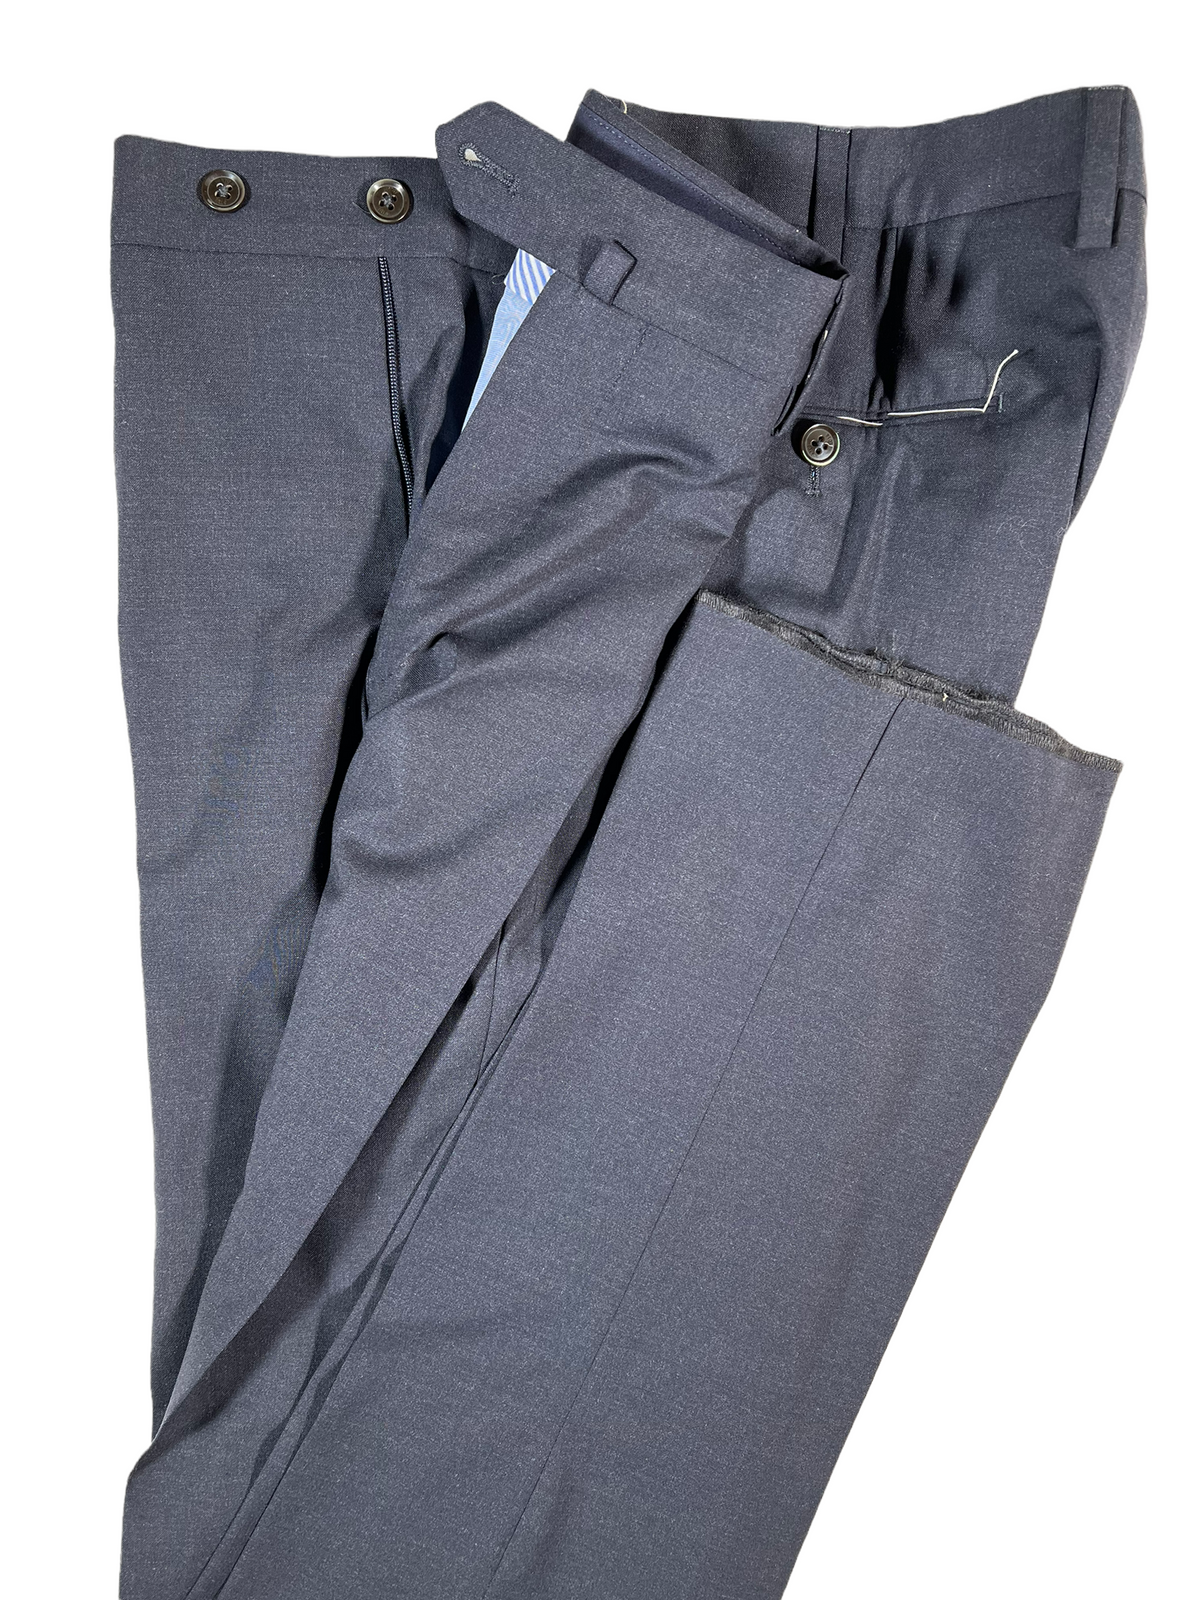 PT TORINO FLAT FRONT STRETCH WOOL BUSINESS TROUSER - NAVY